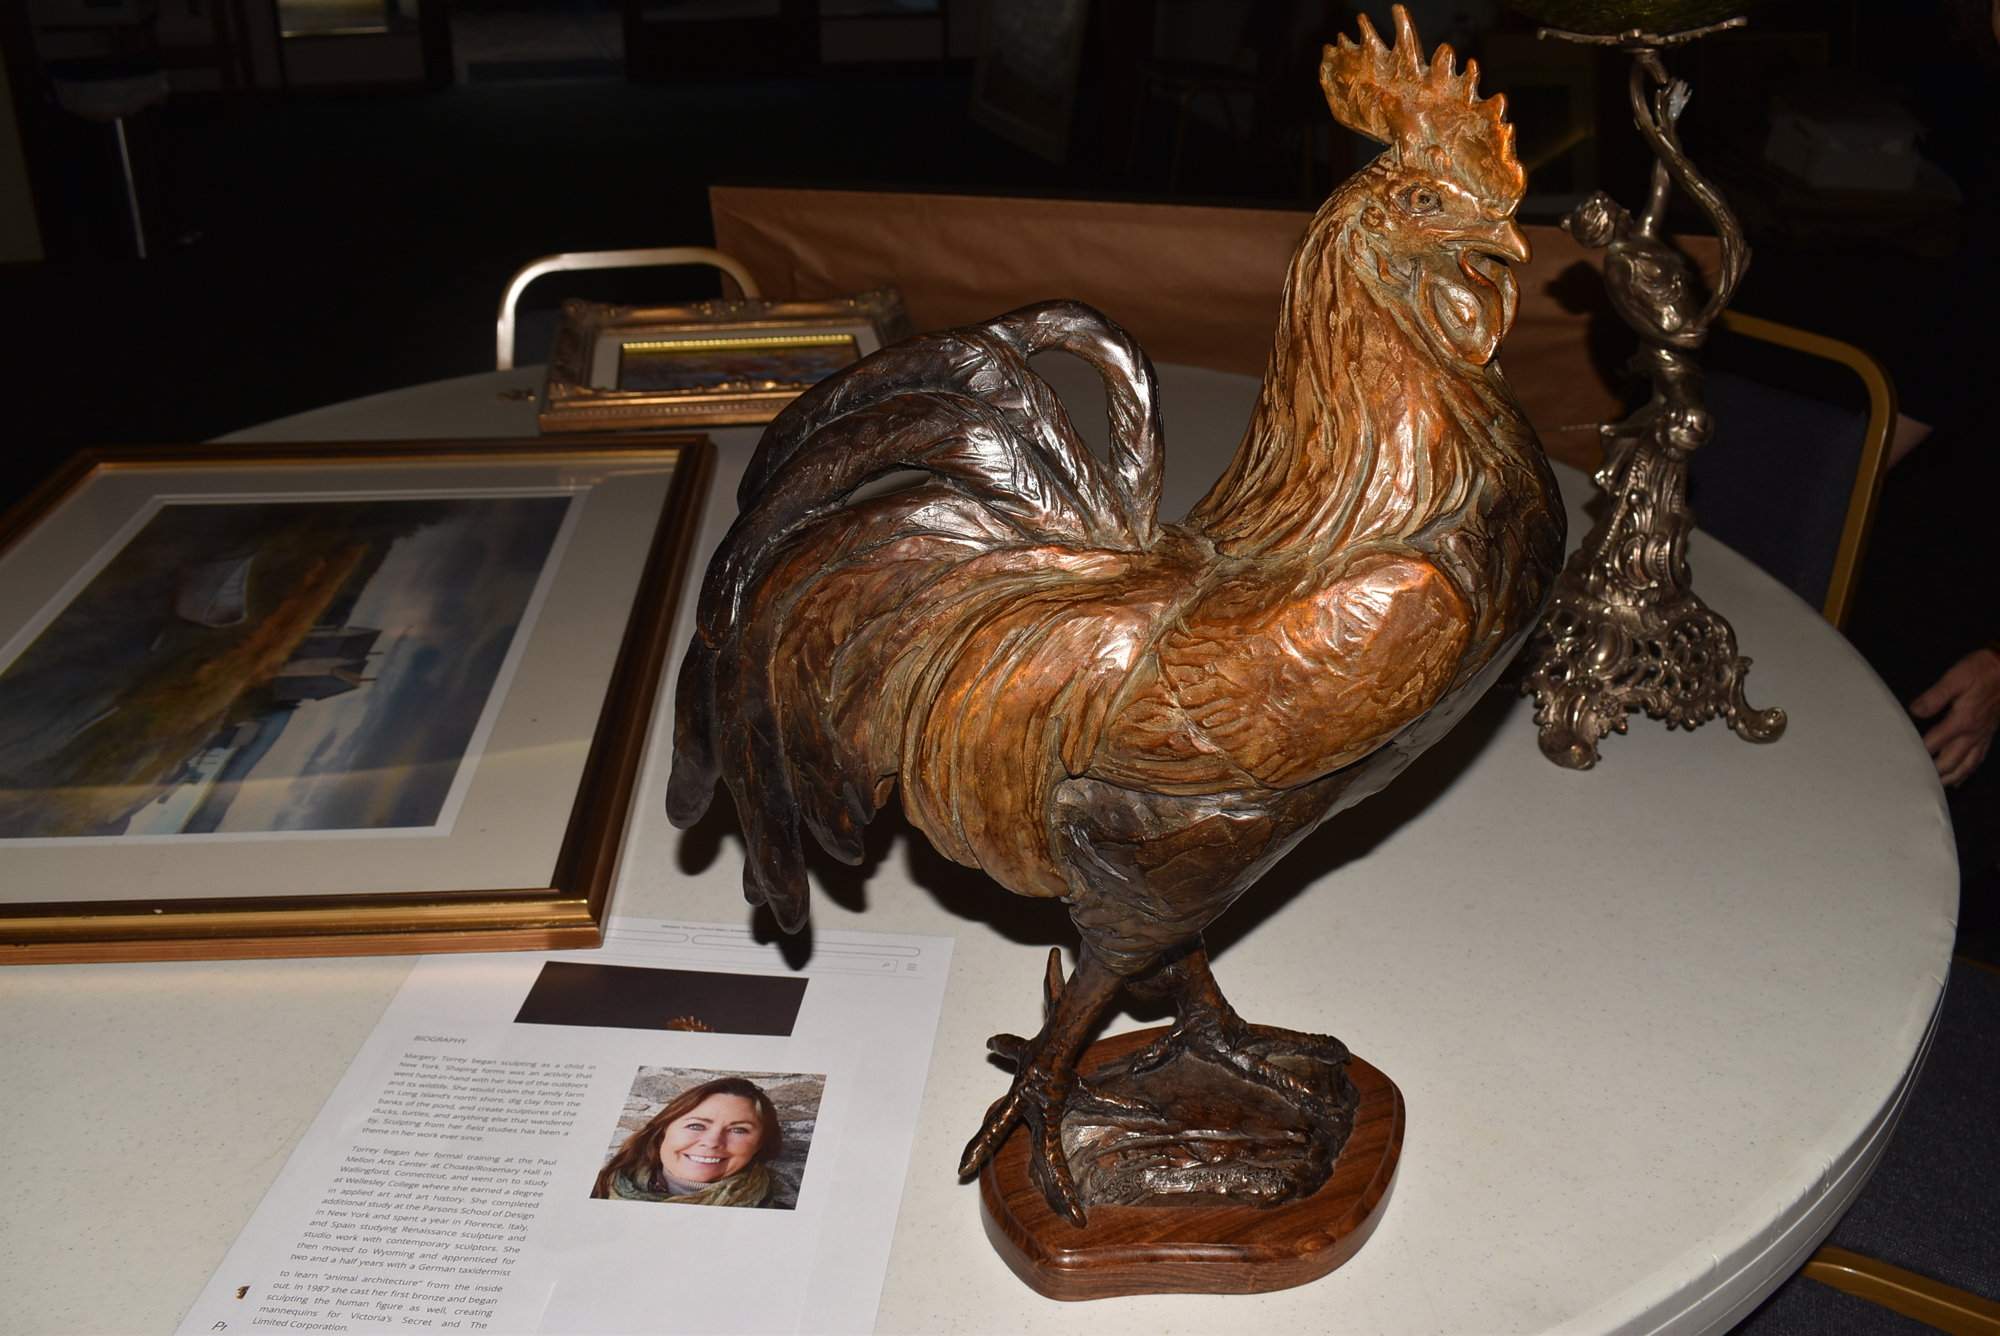 Linn Torres did research on this heavy rooster sculpture and will post the details alongside it in the gallery.